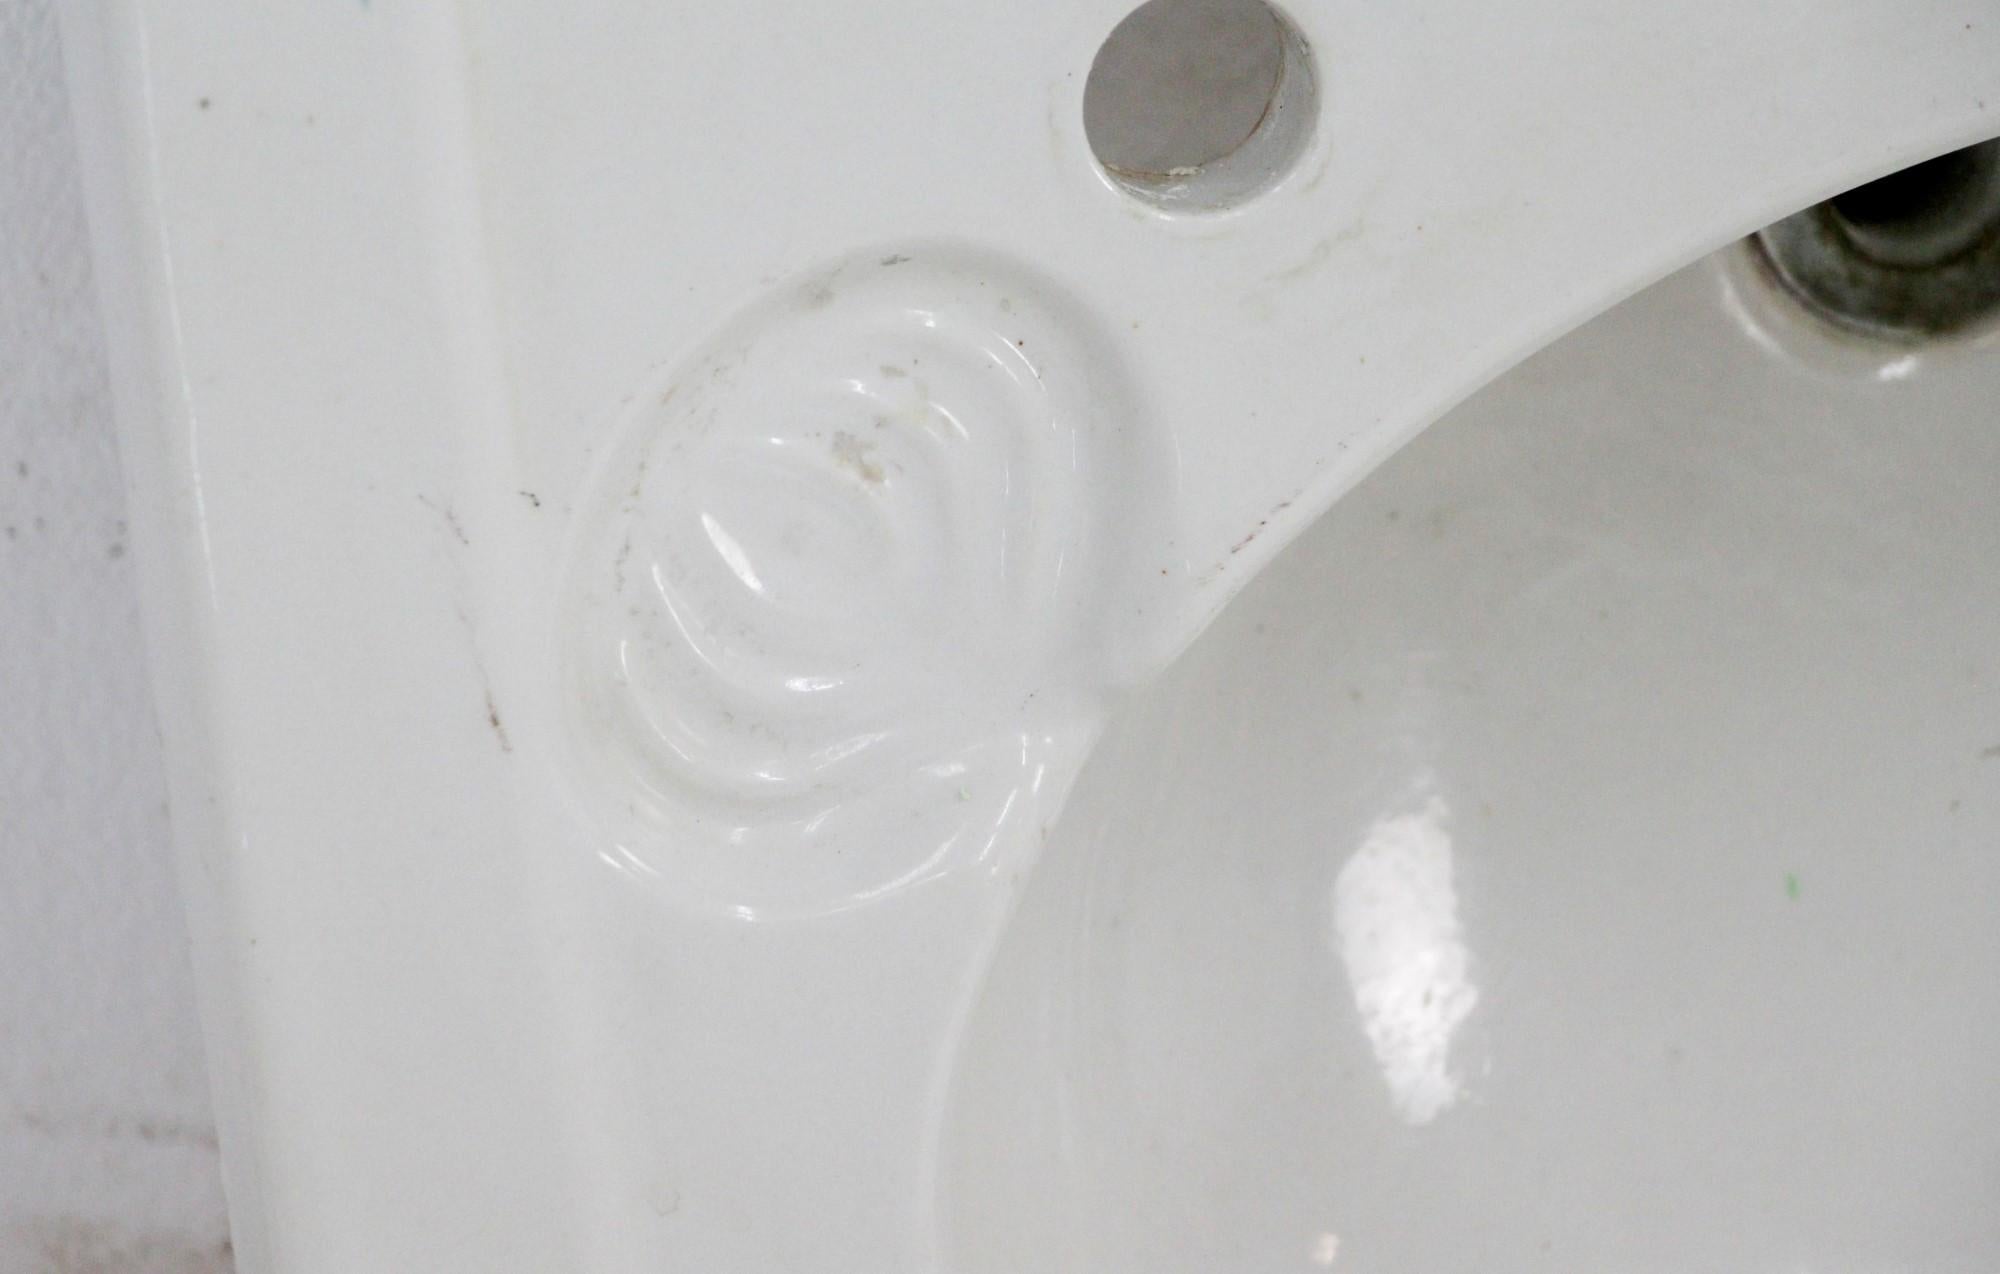 lice in sink